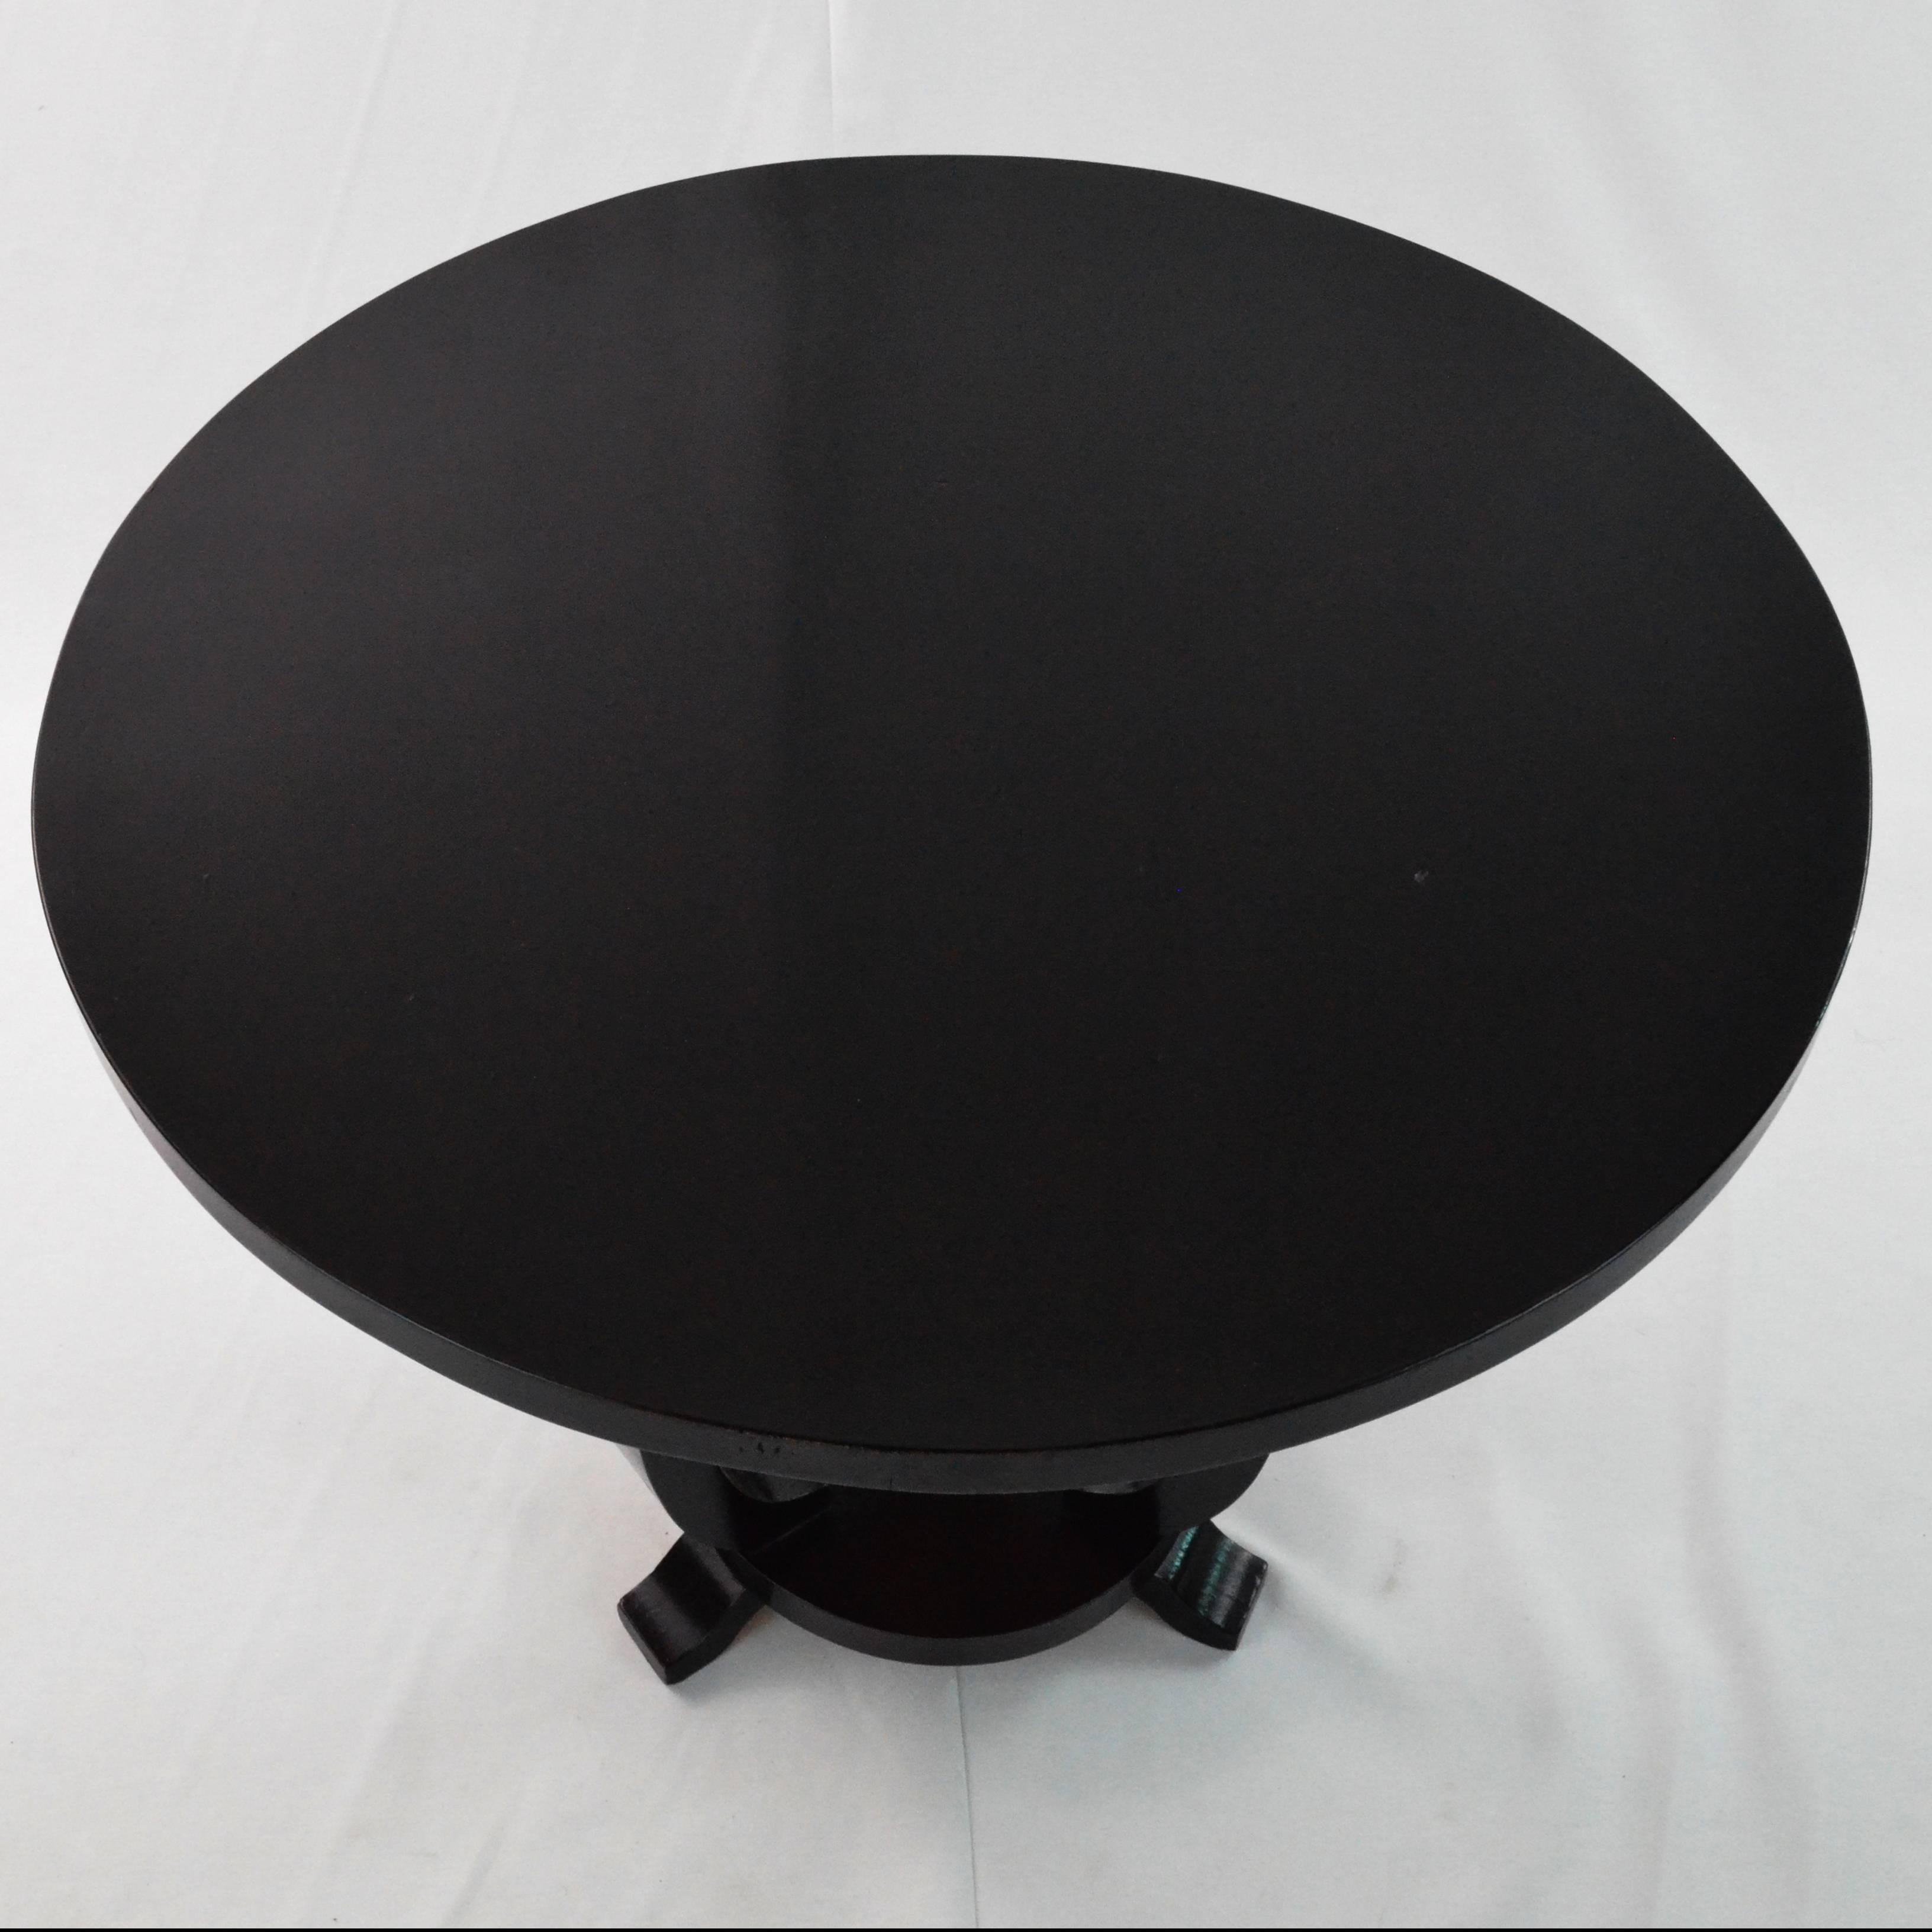 Ebonized Art Deco gueridon small table. From France from early 20th century. It needed only conservative restoration. This kind of table is like a passe-partout it is easy to place both near a sofa as sofa table and as a bedside table in bedroom.

